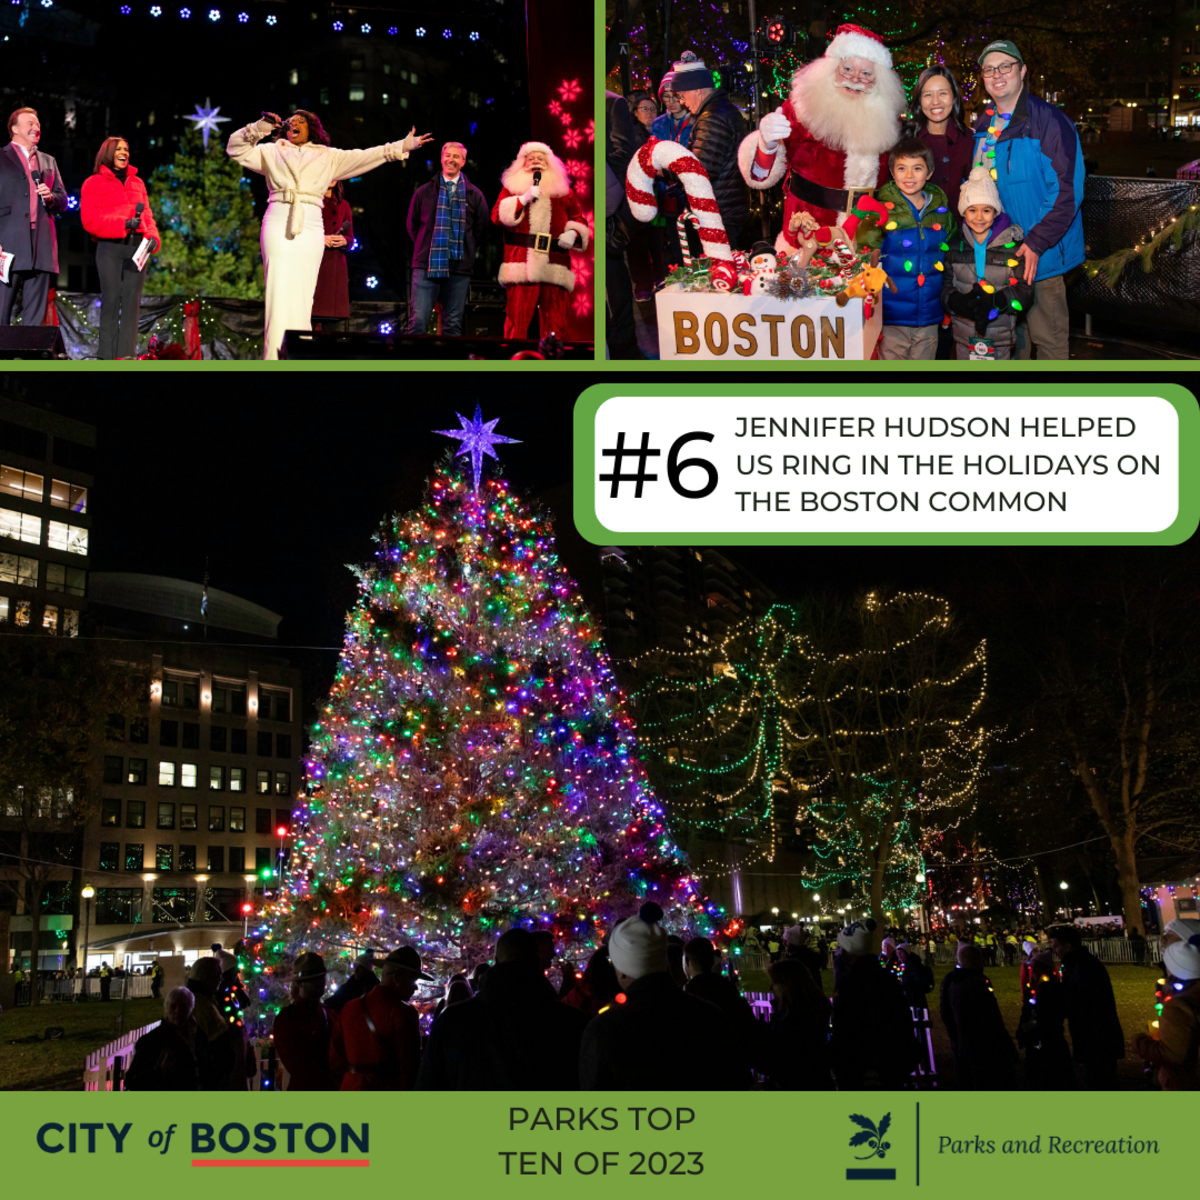 6. JENNIFER HUDSON HELPED US RING IN THE HOLIDAYS ON THE BOSTON COMMON. Holiday scenes from the BC Tree Lighting